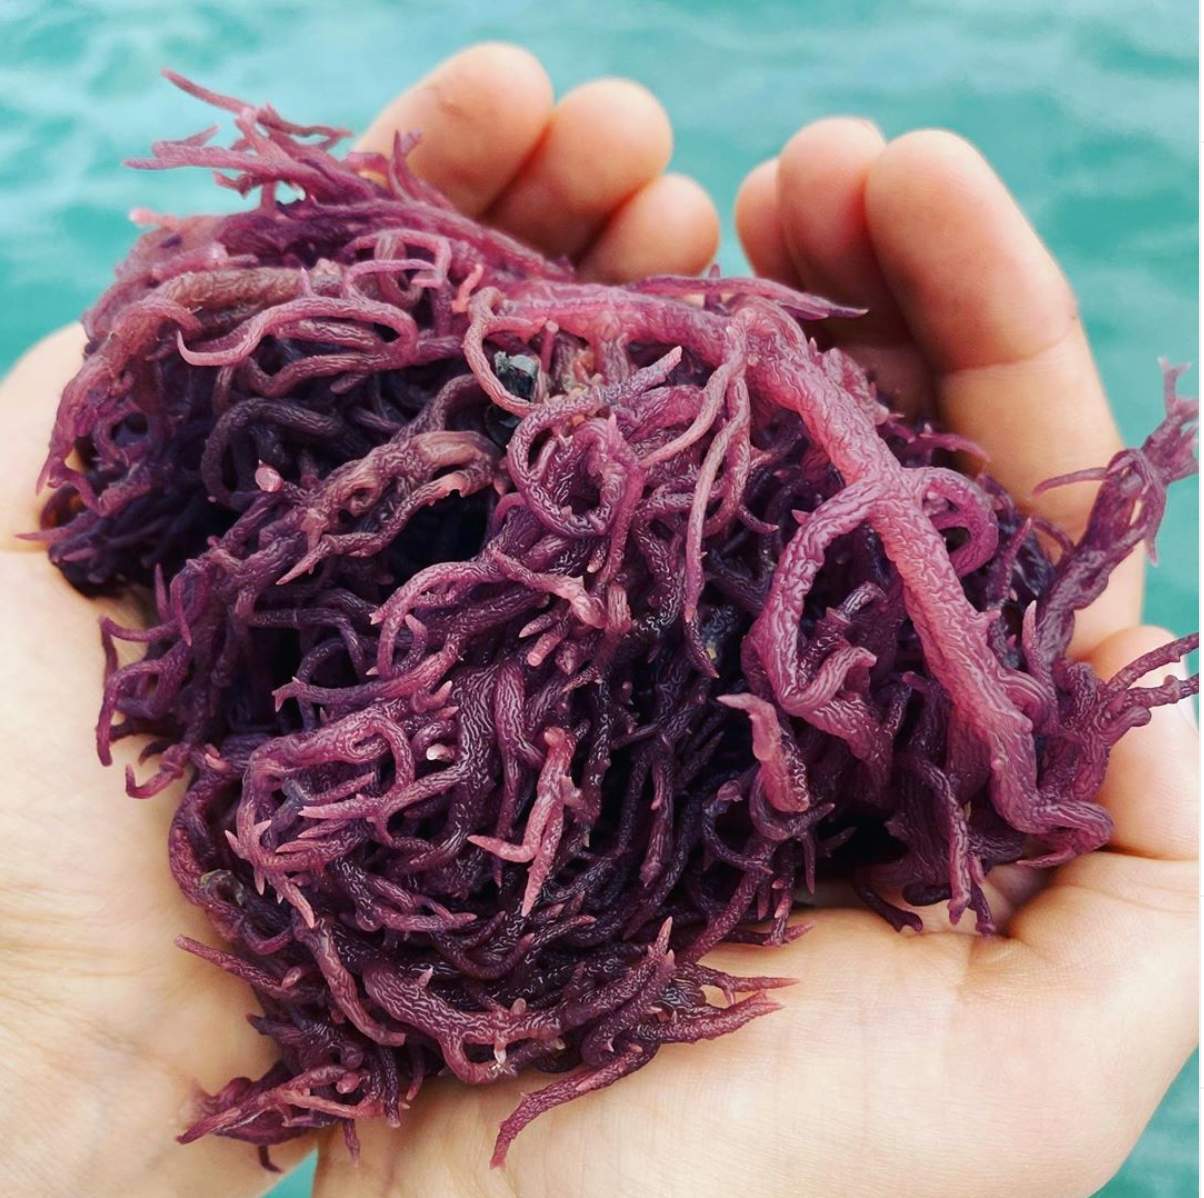 wildcrafted pure purple dried sea moss, ethically harvested and sundried. available in norway and the world